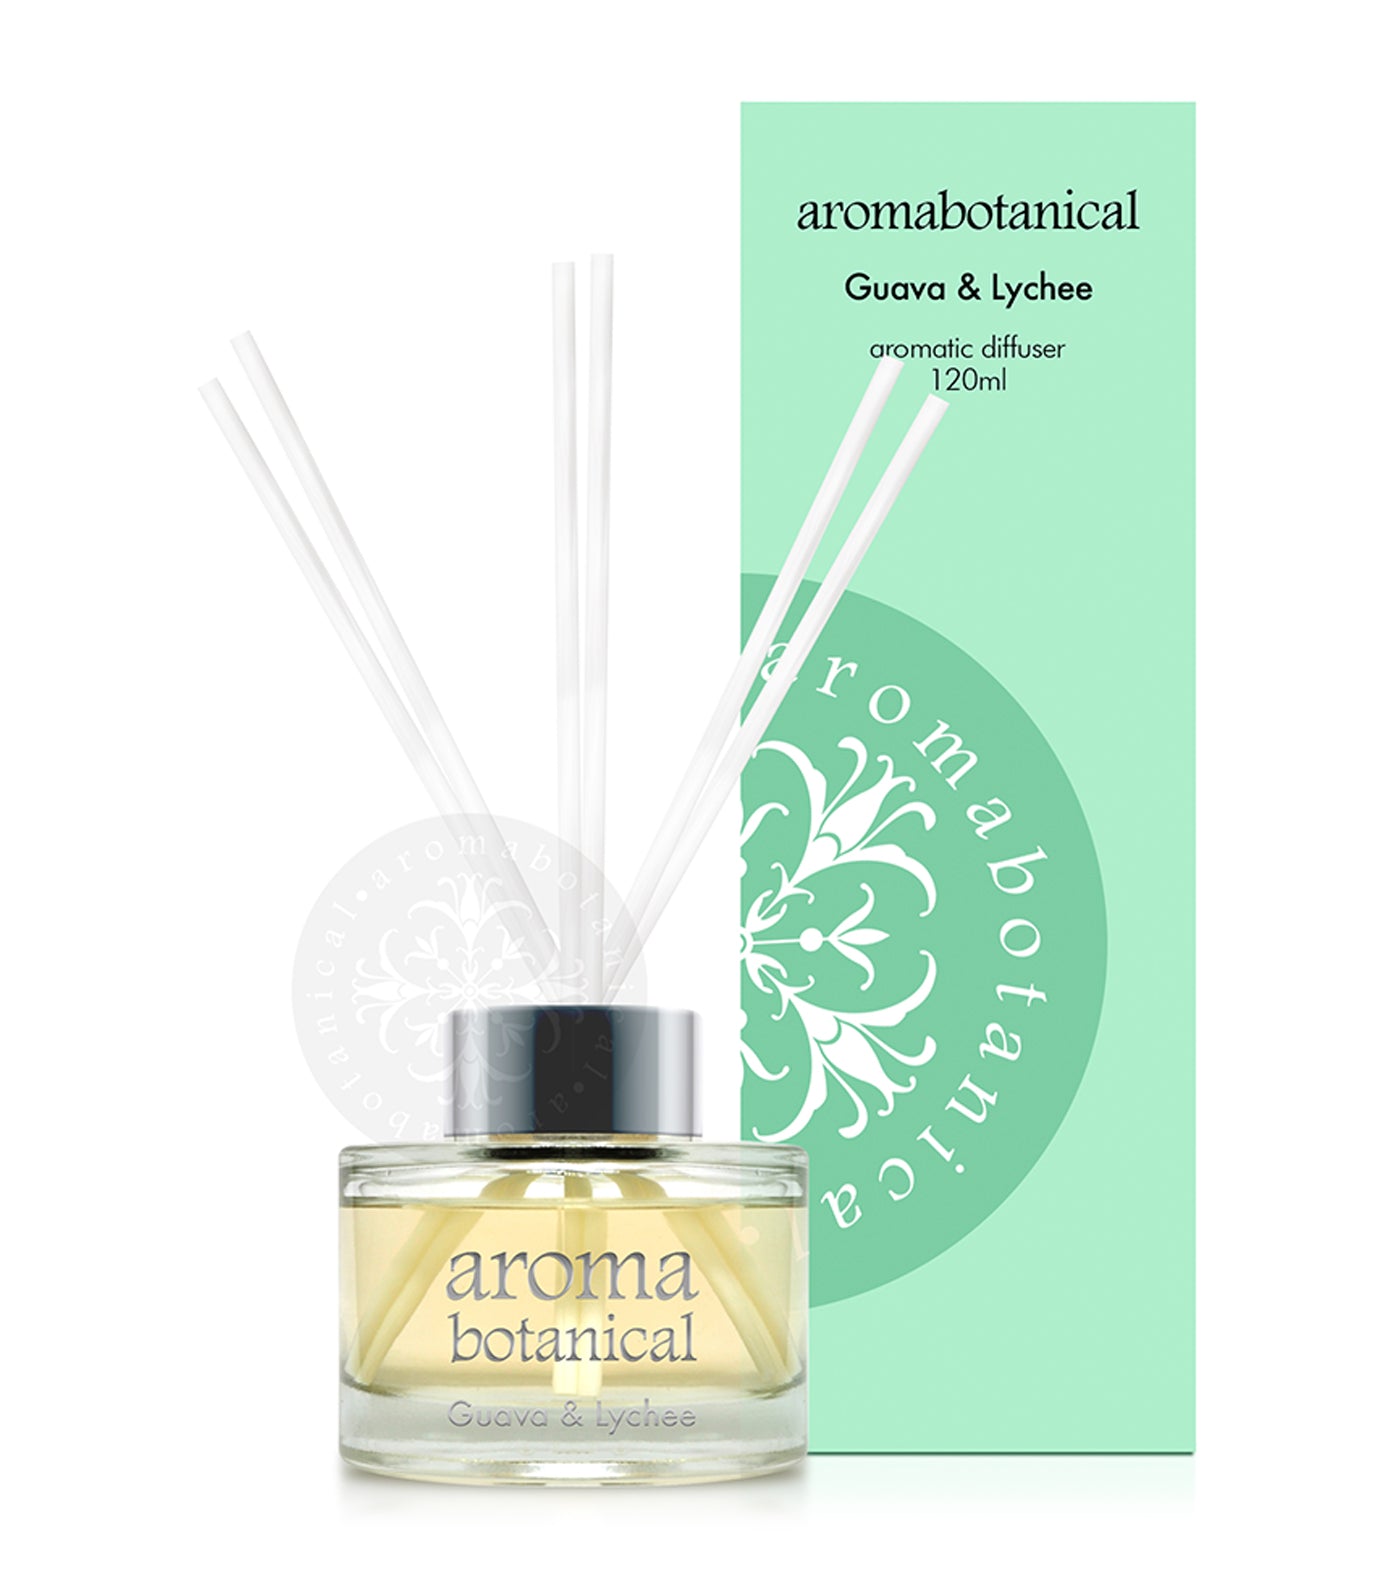 aromabotanical guava & lychee 120ml reed diffuser